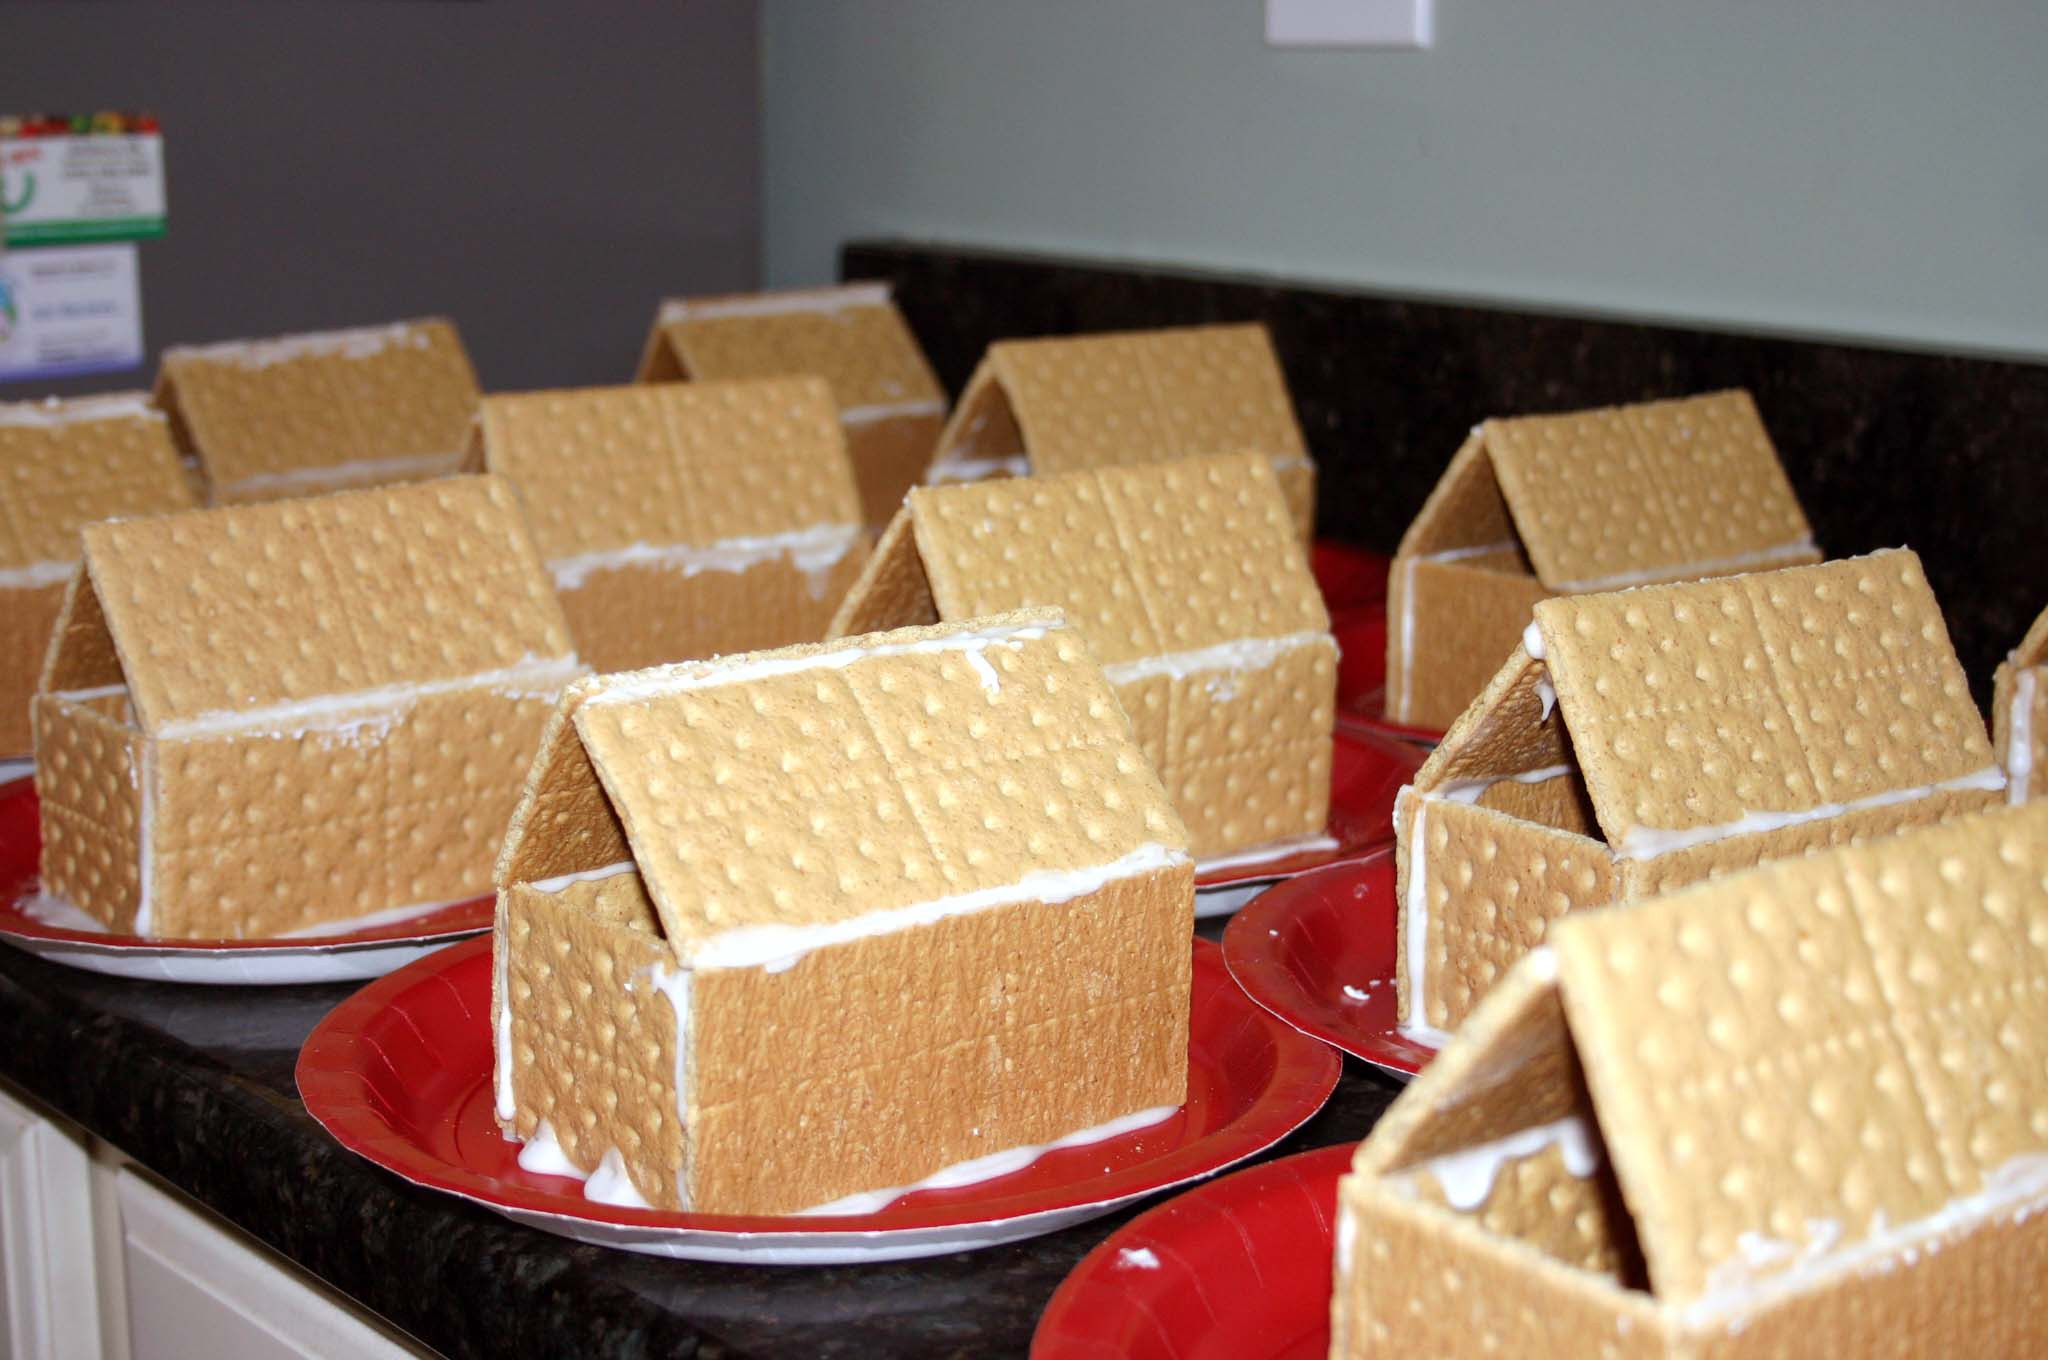 Christmas Classroom Party Ideas
 Gingerbread Houses at Christmas Classroom Party